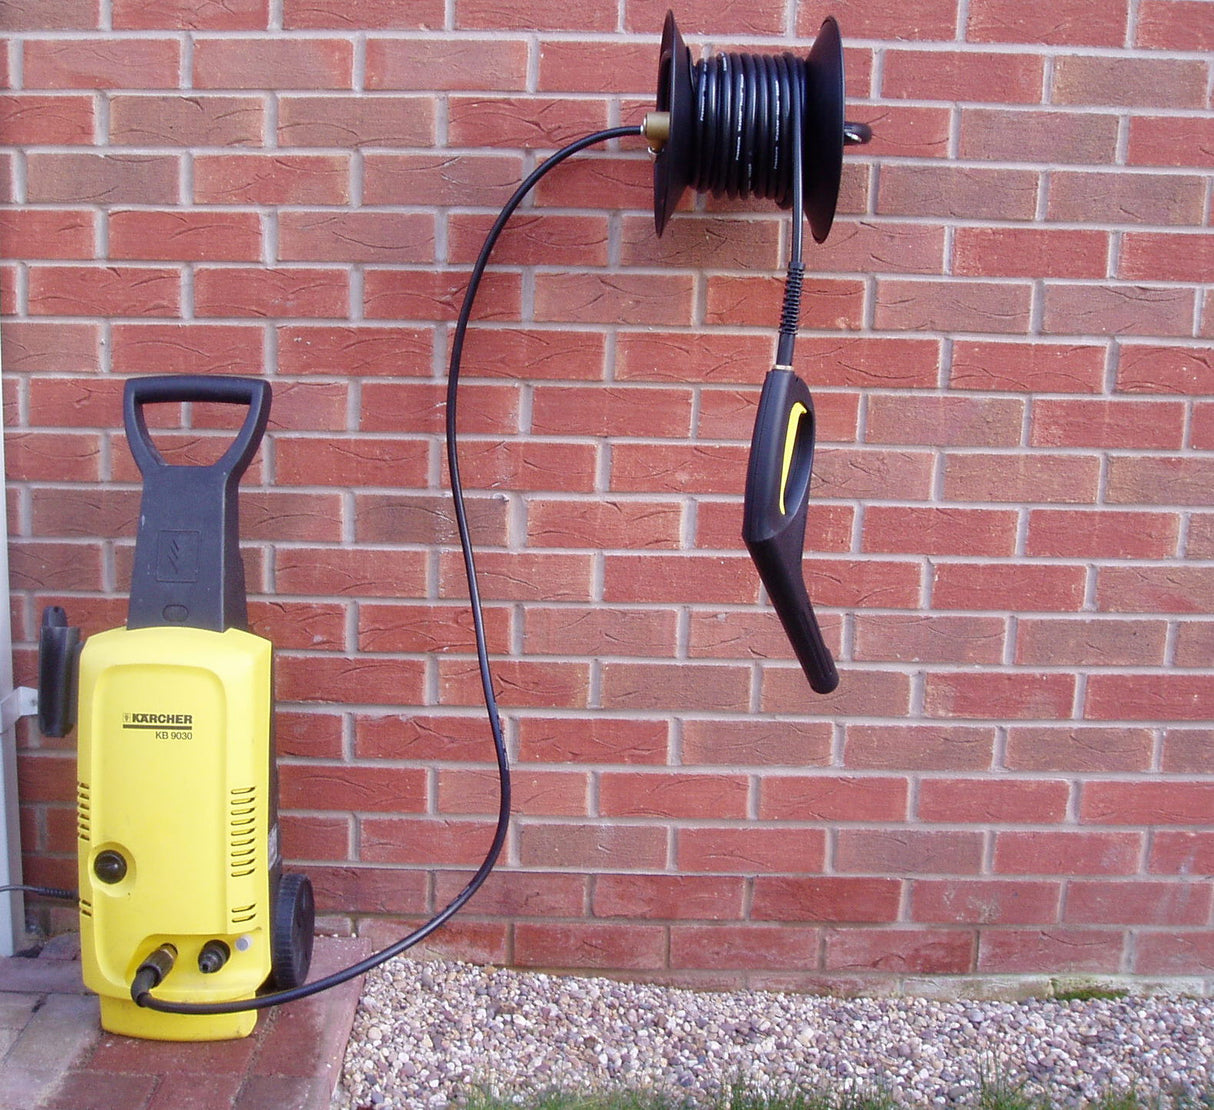 Manual Hose Reel complete with hose For Karcher 'K' Series Pressure Washers complete with Trigger